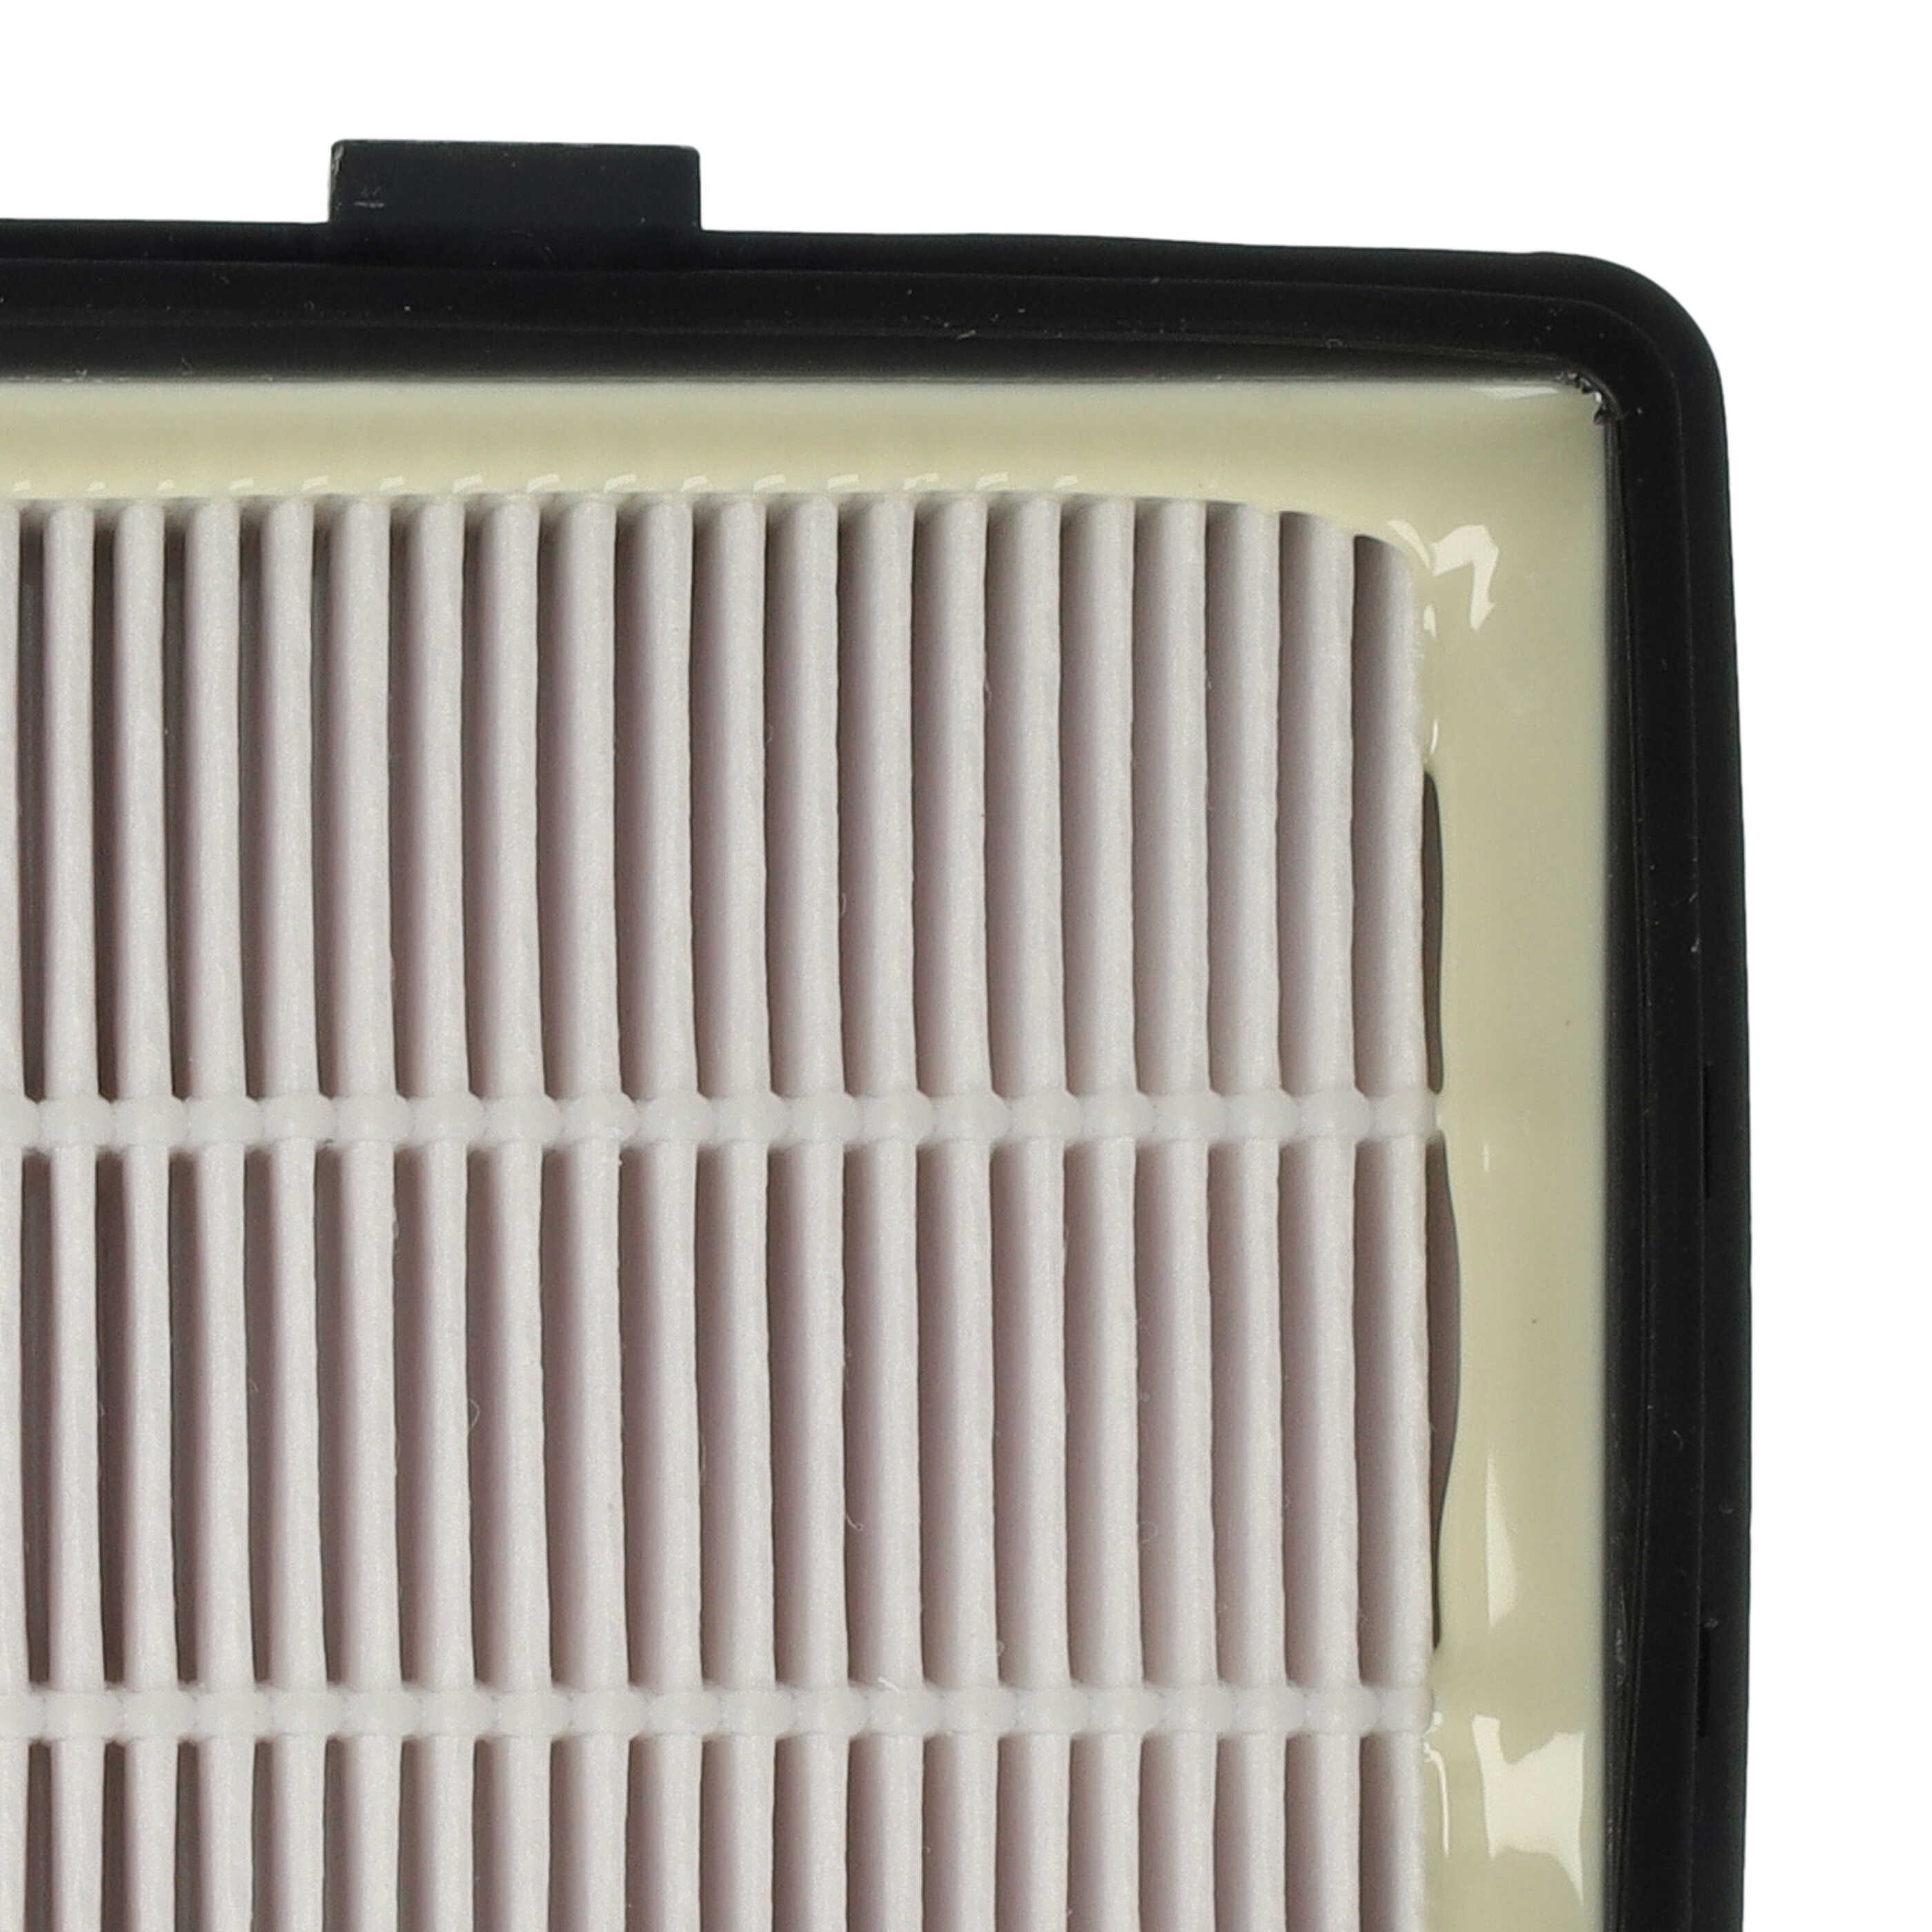 1x exhaust EPA filter replaces Rowenta RS-RT4310 for Rowenta Vacuum Cleaner